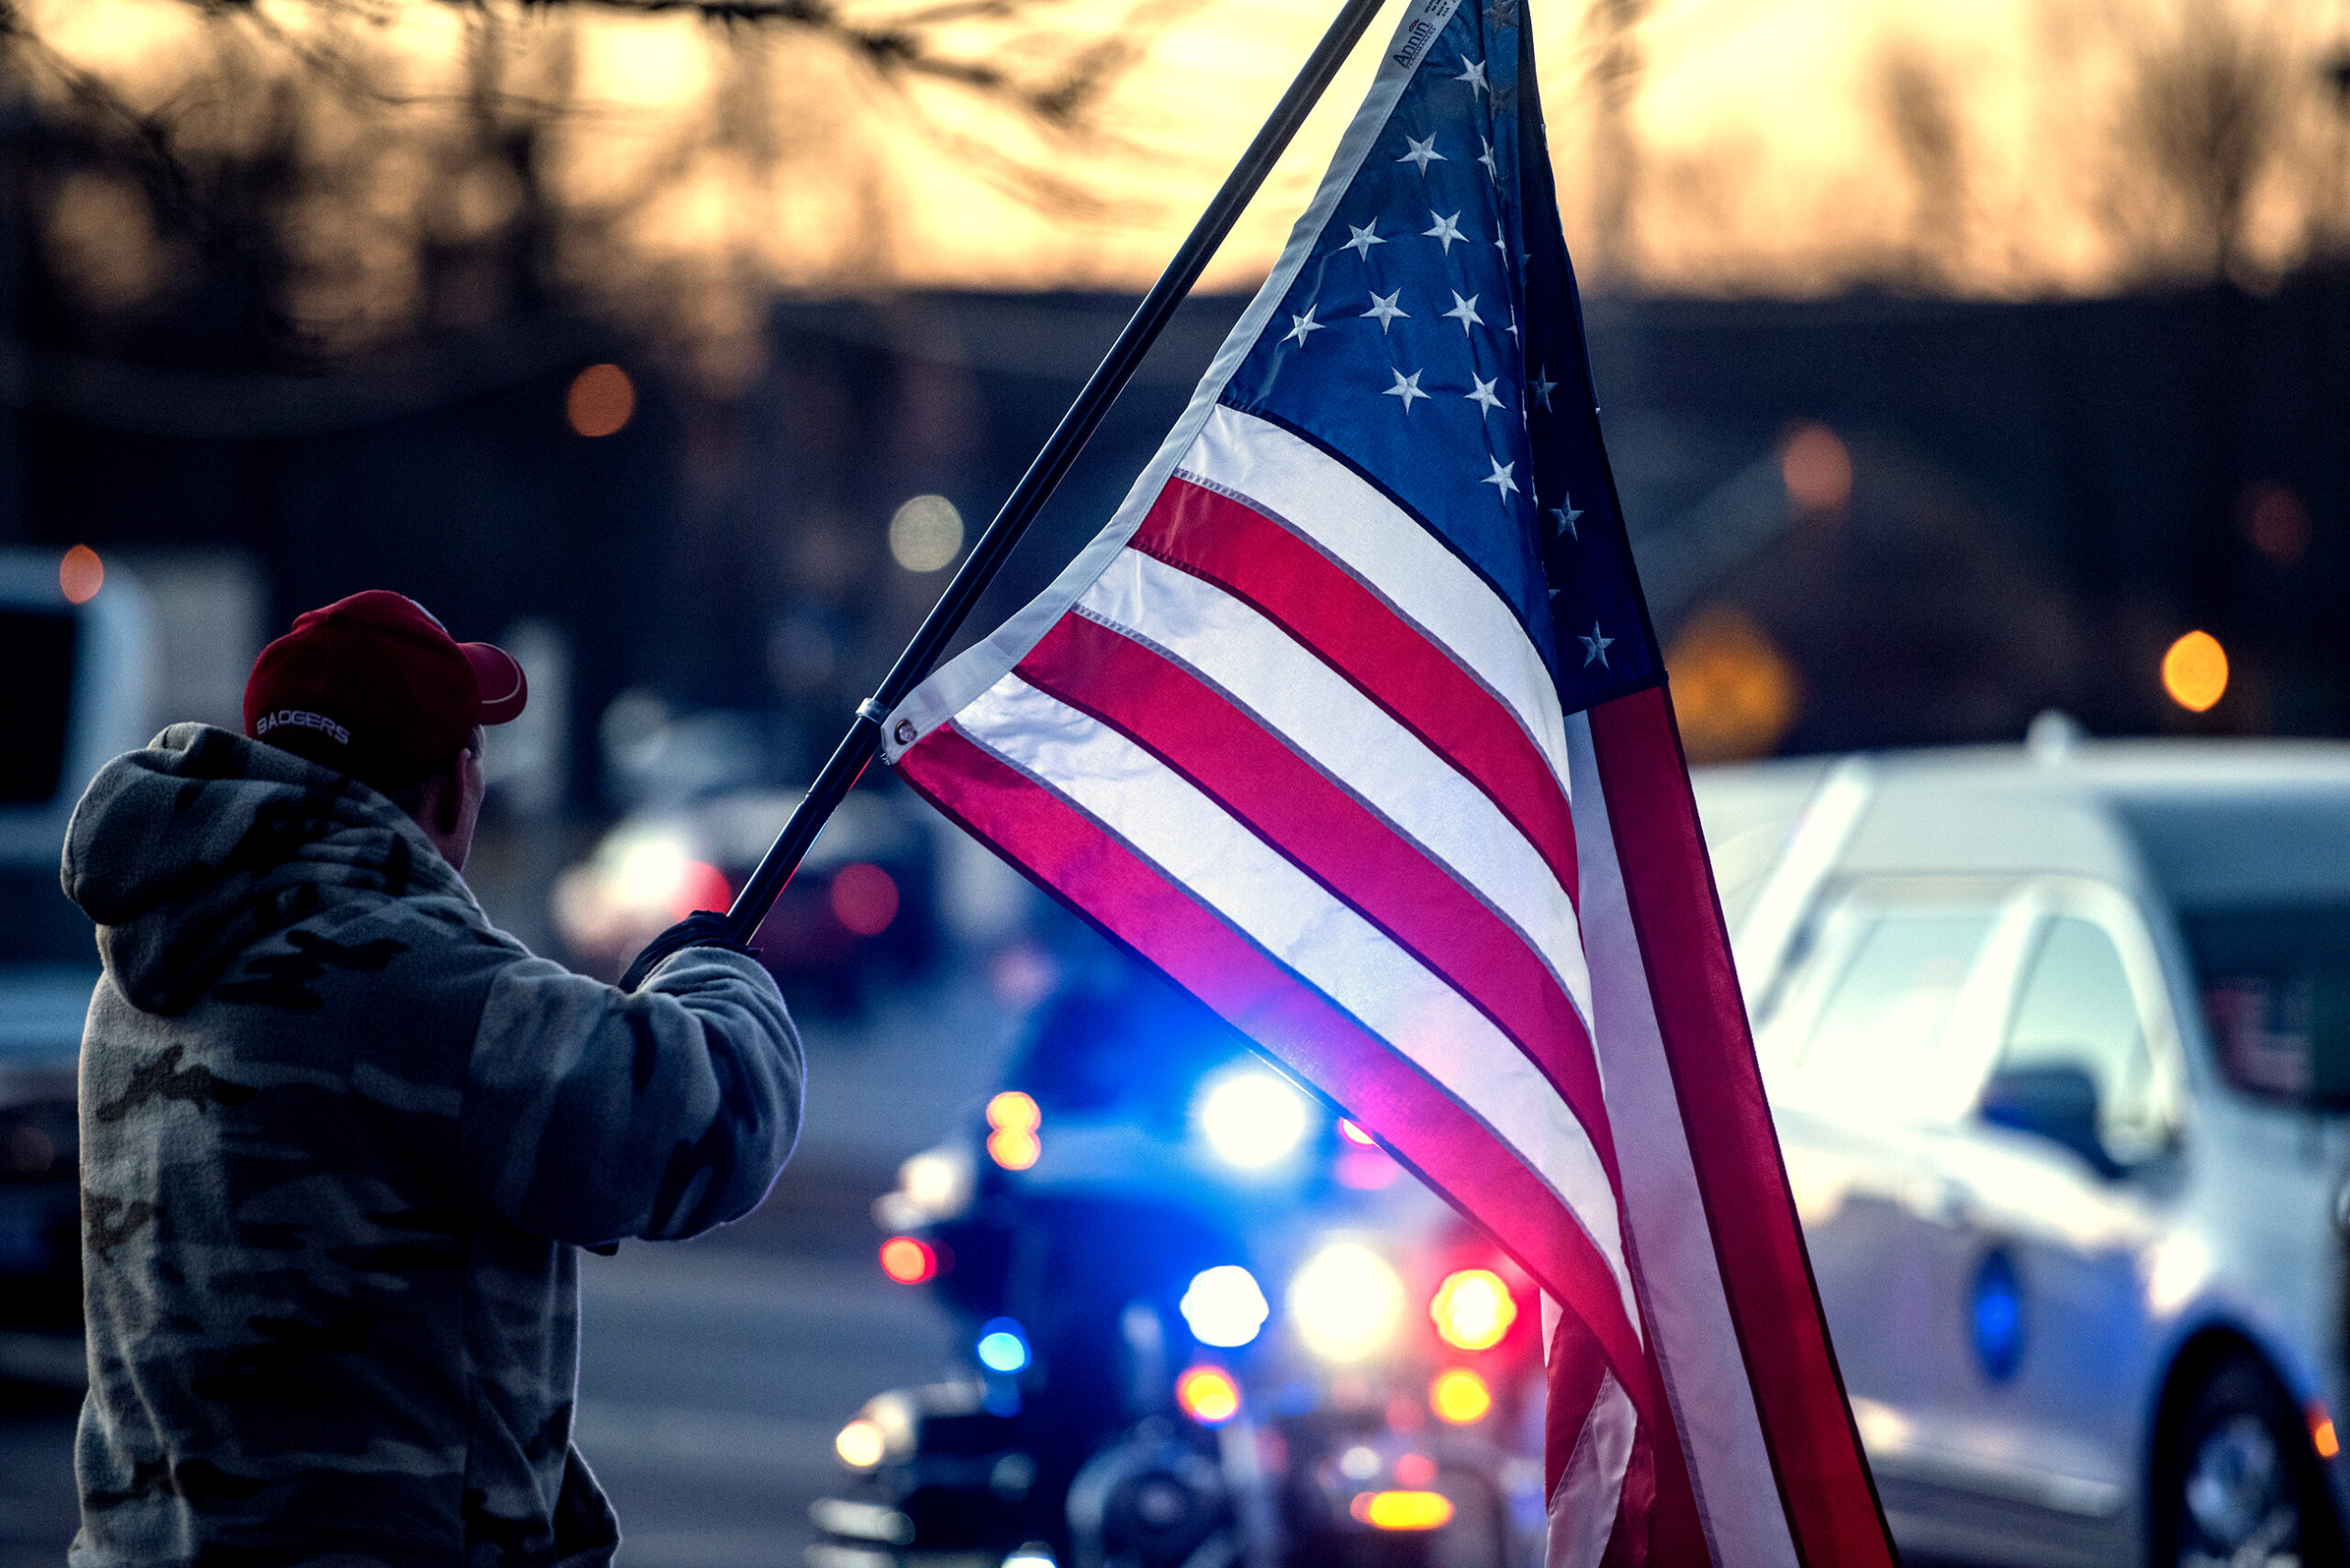 The stripes of a U.S. flag are illuminated by blue and red police lights. A white hearse passes by in the background.